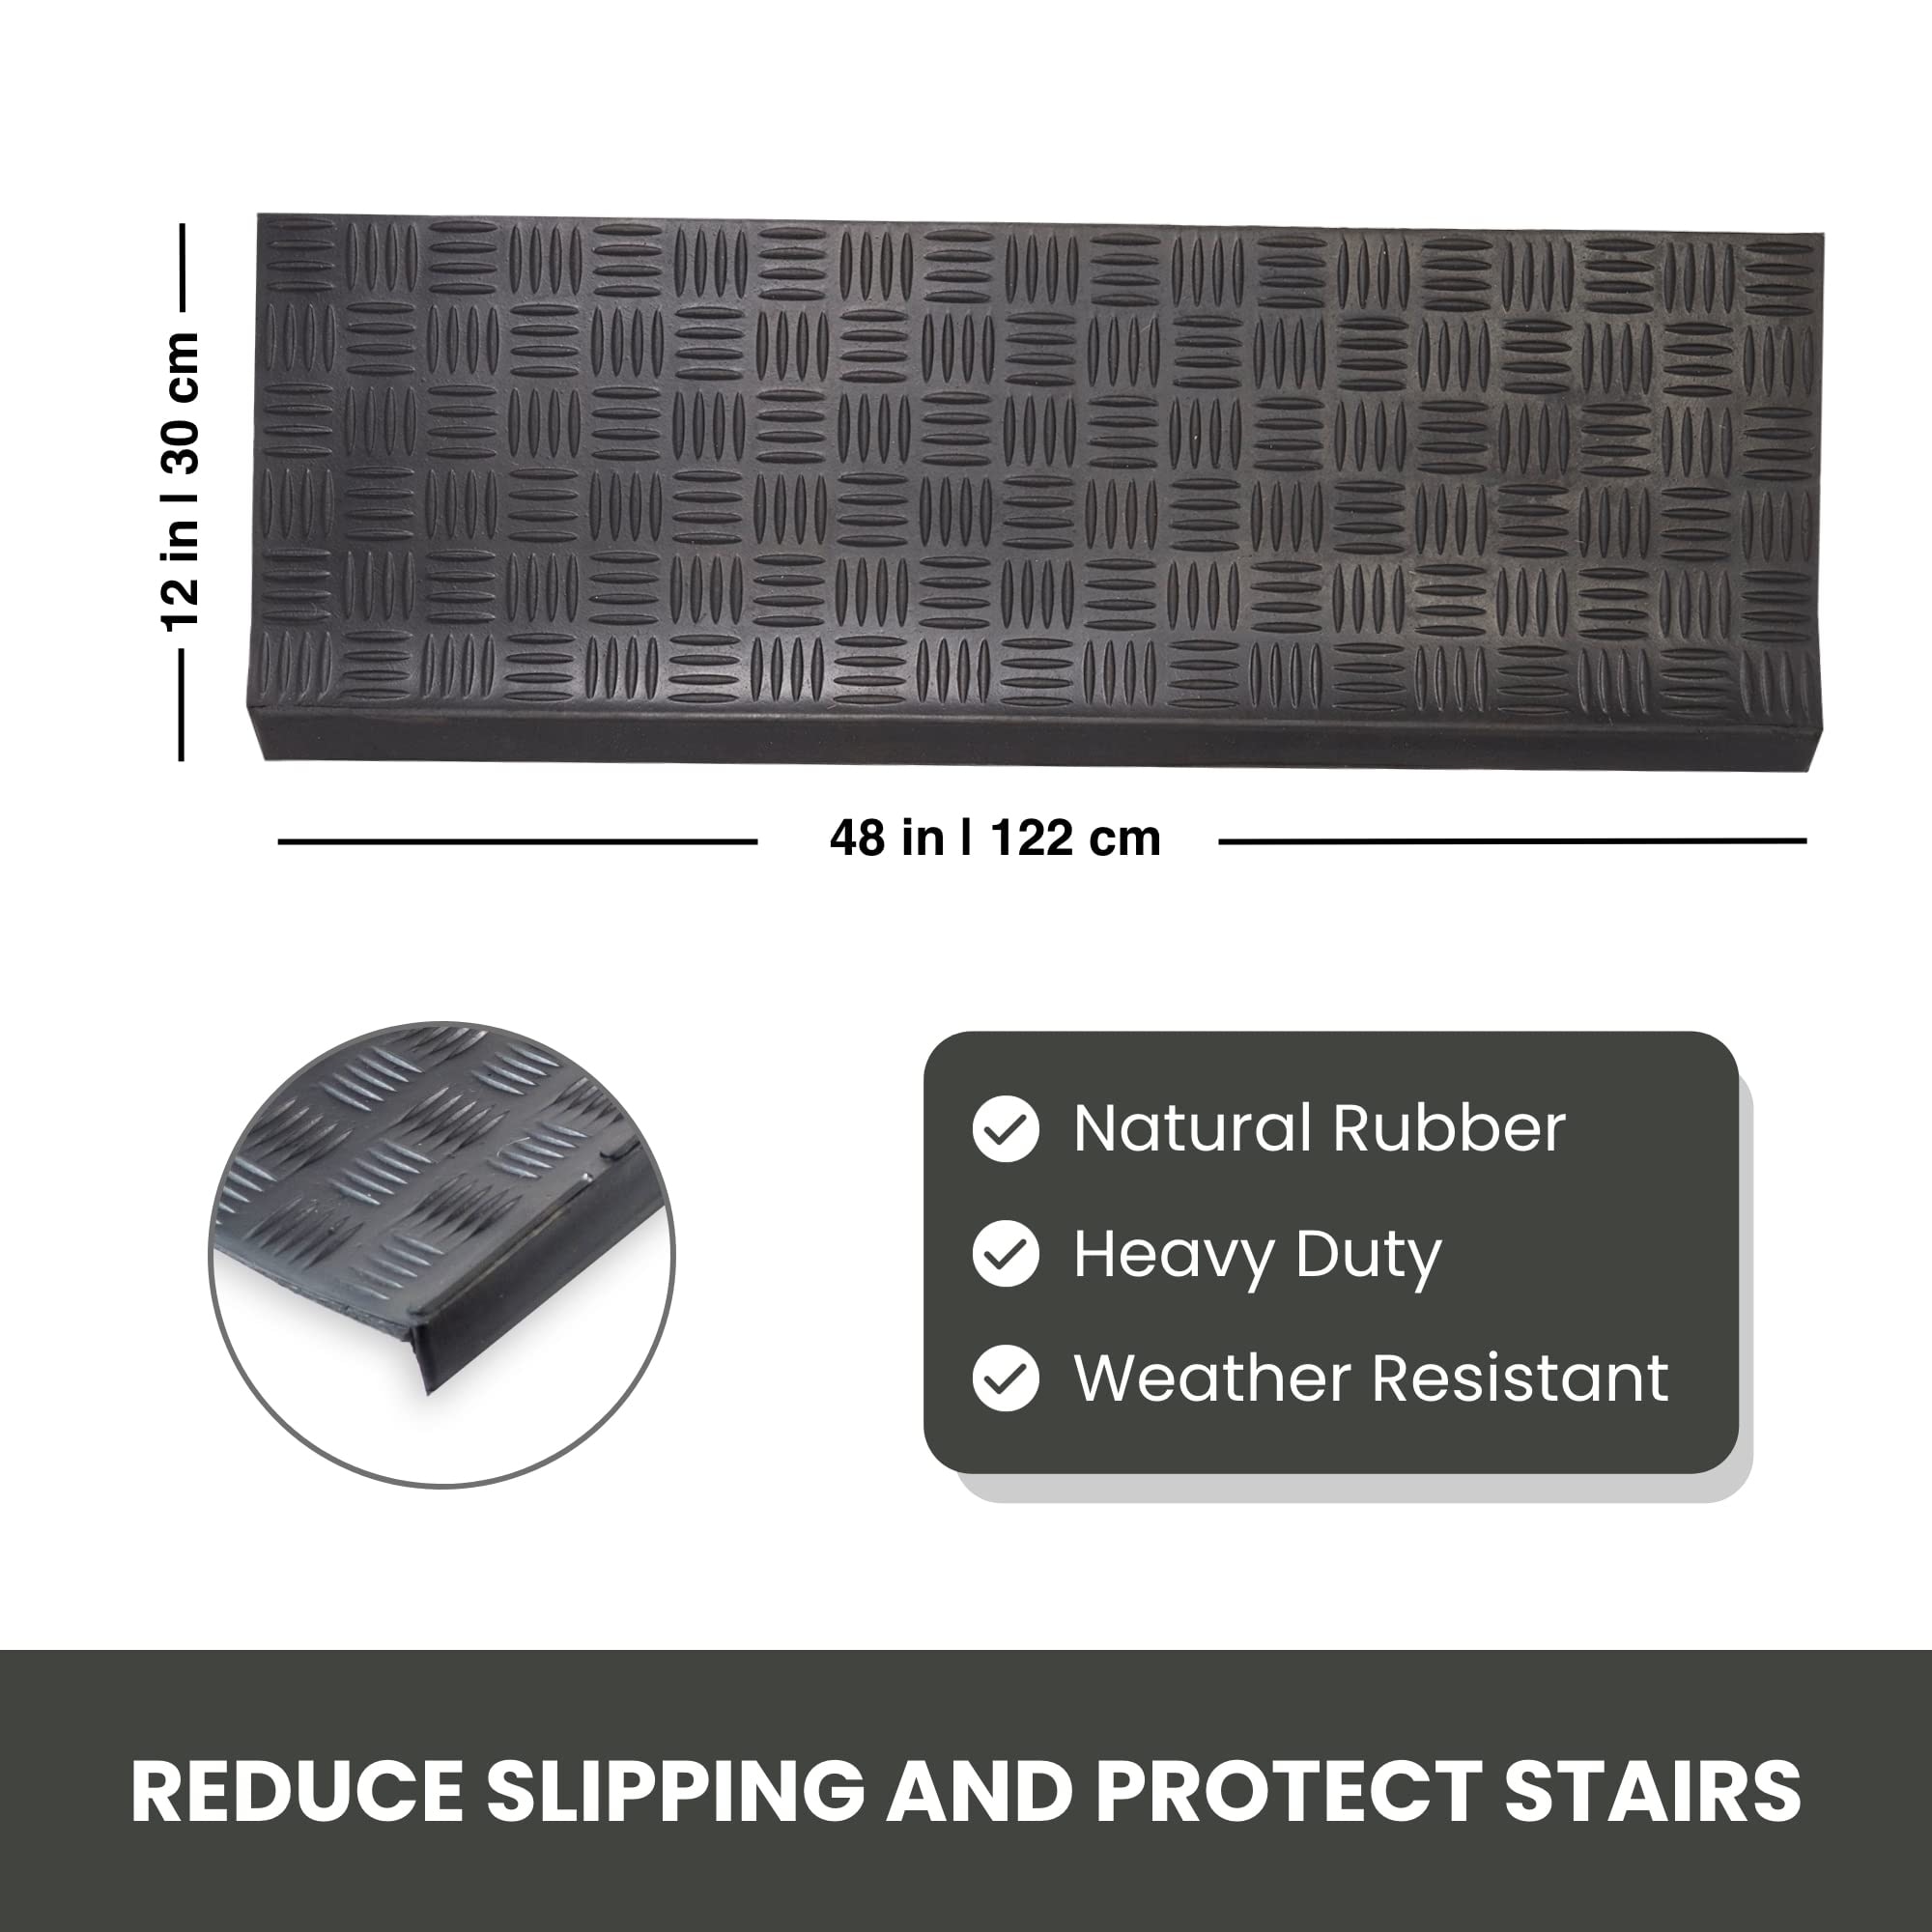 https://ak1.ostkcdn.com/images/products/is/images/direct/b2f22d5ad3447d22b11dbf6dbf61d5909ea19843/Envelor-Indoor-Outdoor-Non-Slip-Step-Mats-Stair-Treads-Rubber-Step-Mats---6-Pack.jpg